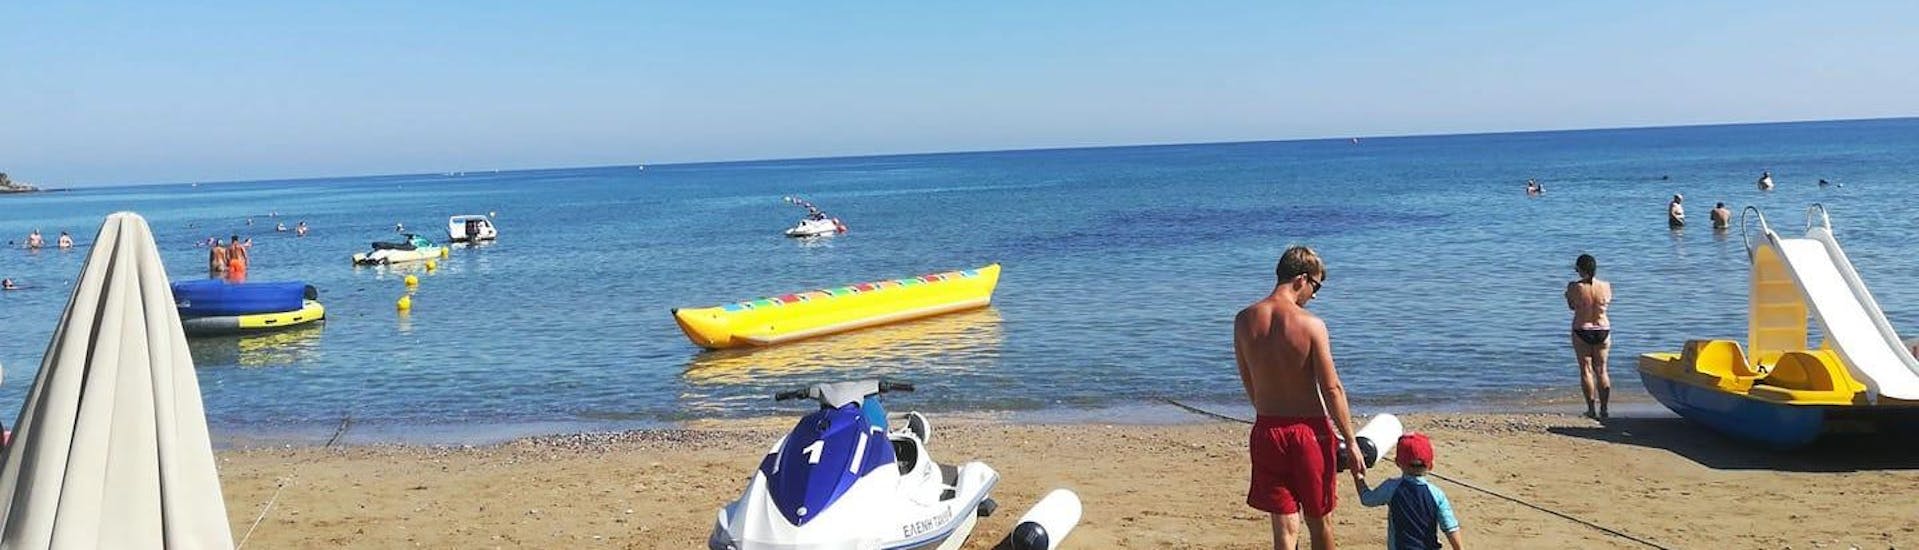 Beach of Stalida, where Slalom Water Sports offers its Jet Skis in Stalida in Crete.